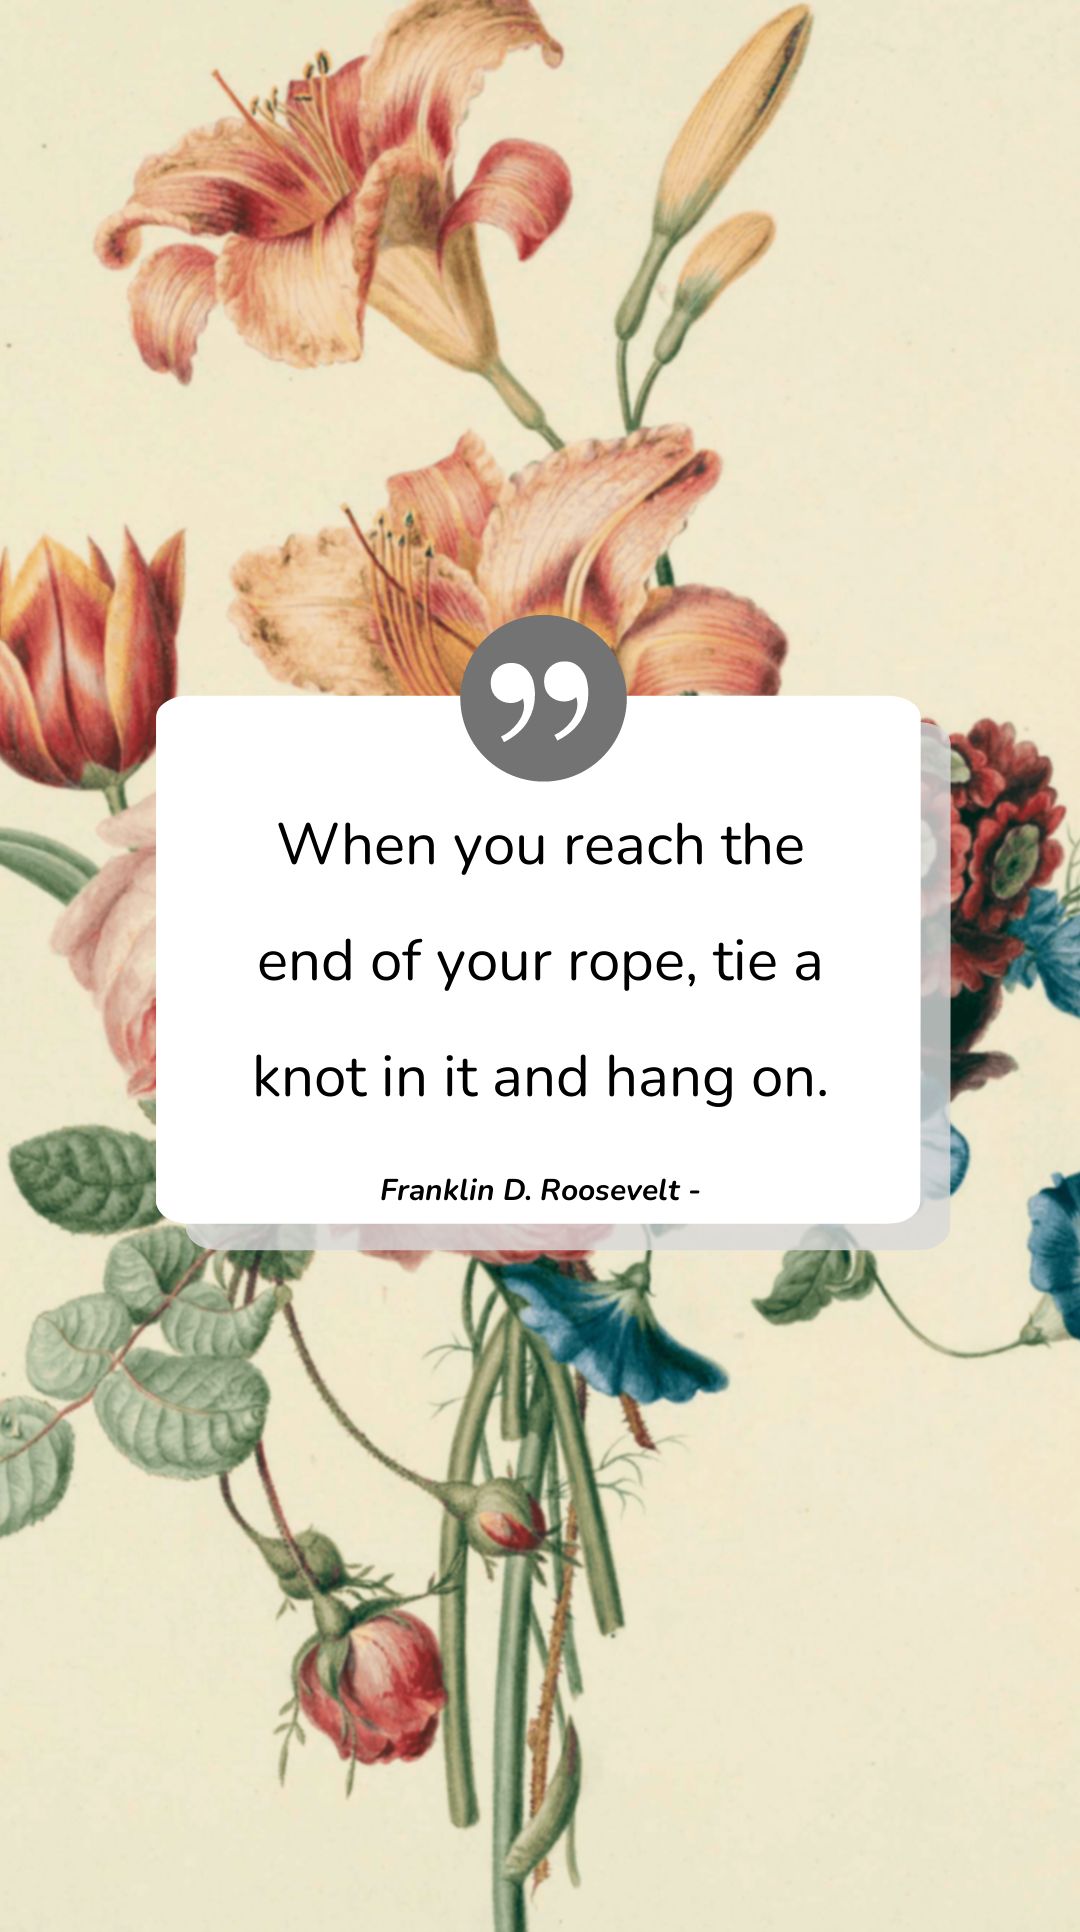 Franklin D. Roosevelt - When you reach the end of your rope, tie a knot in it and hang on.